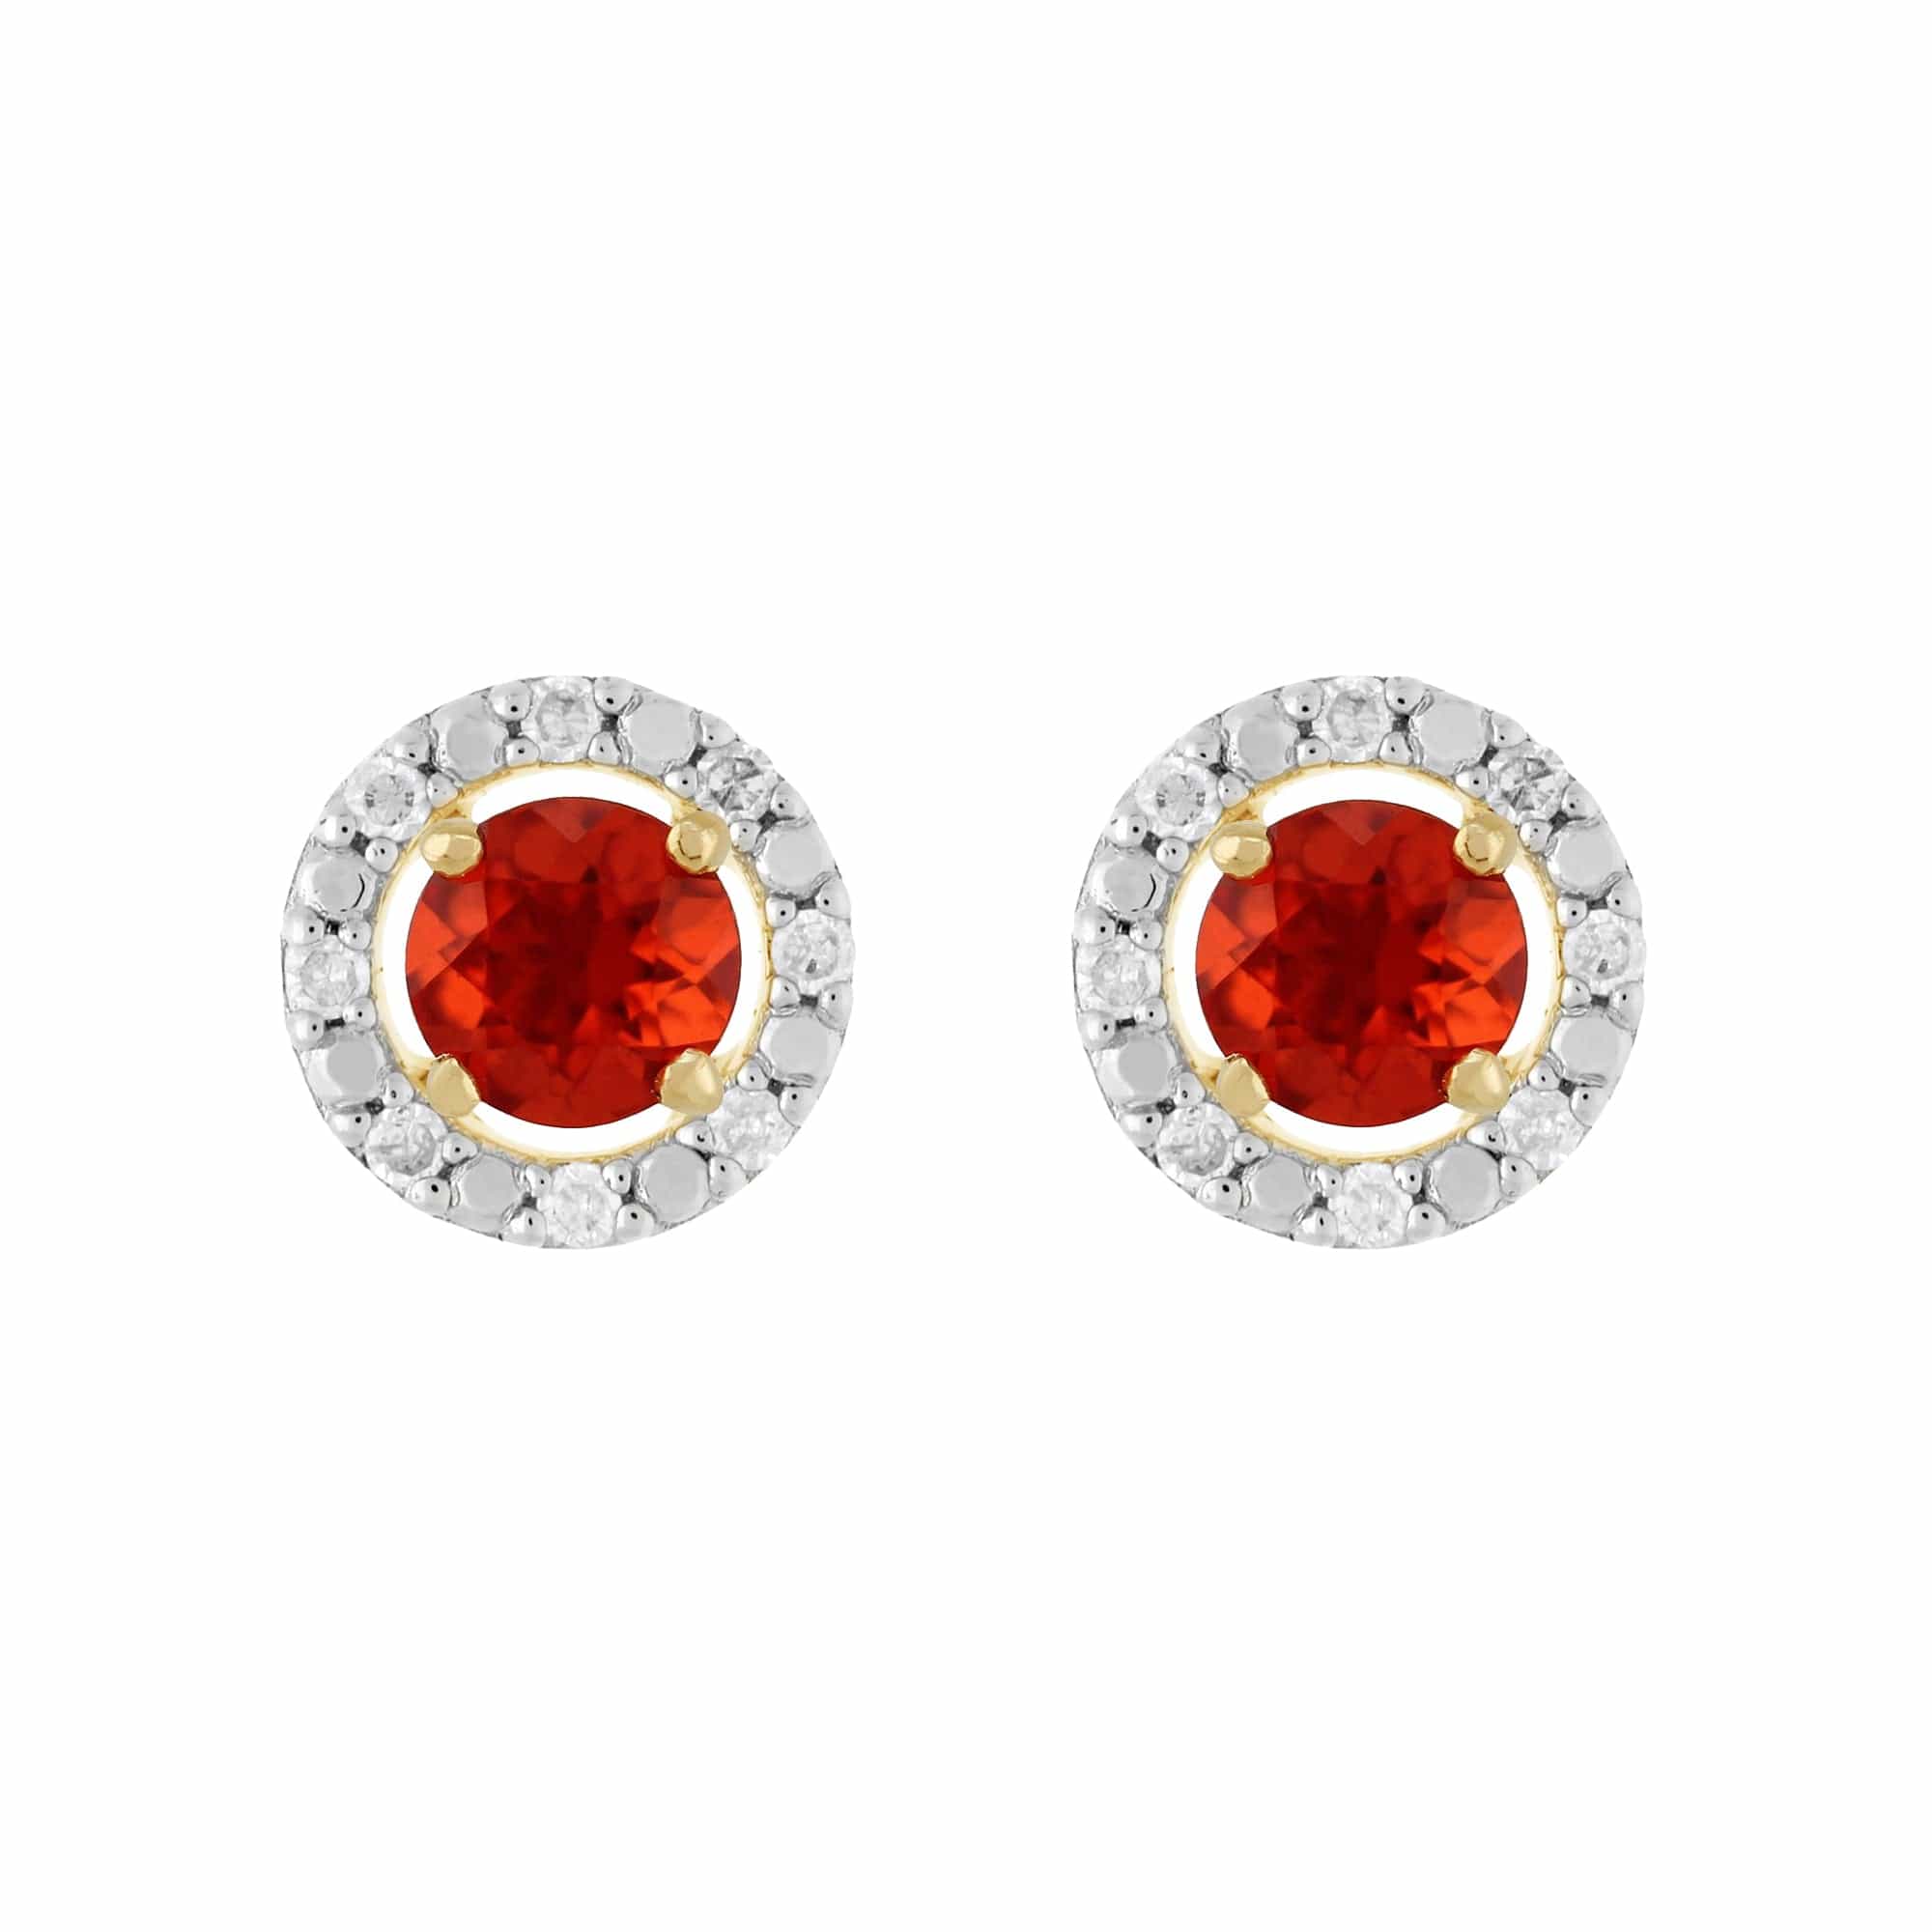 11561-191E0376019 Classic Round Fire Opal Stud Earrings with Detachable Diamond Round Earrings Jacket Set in 9ct Yellow Gold 1